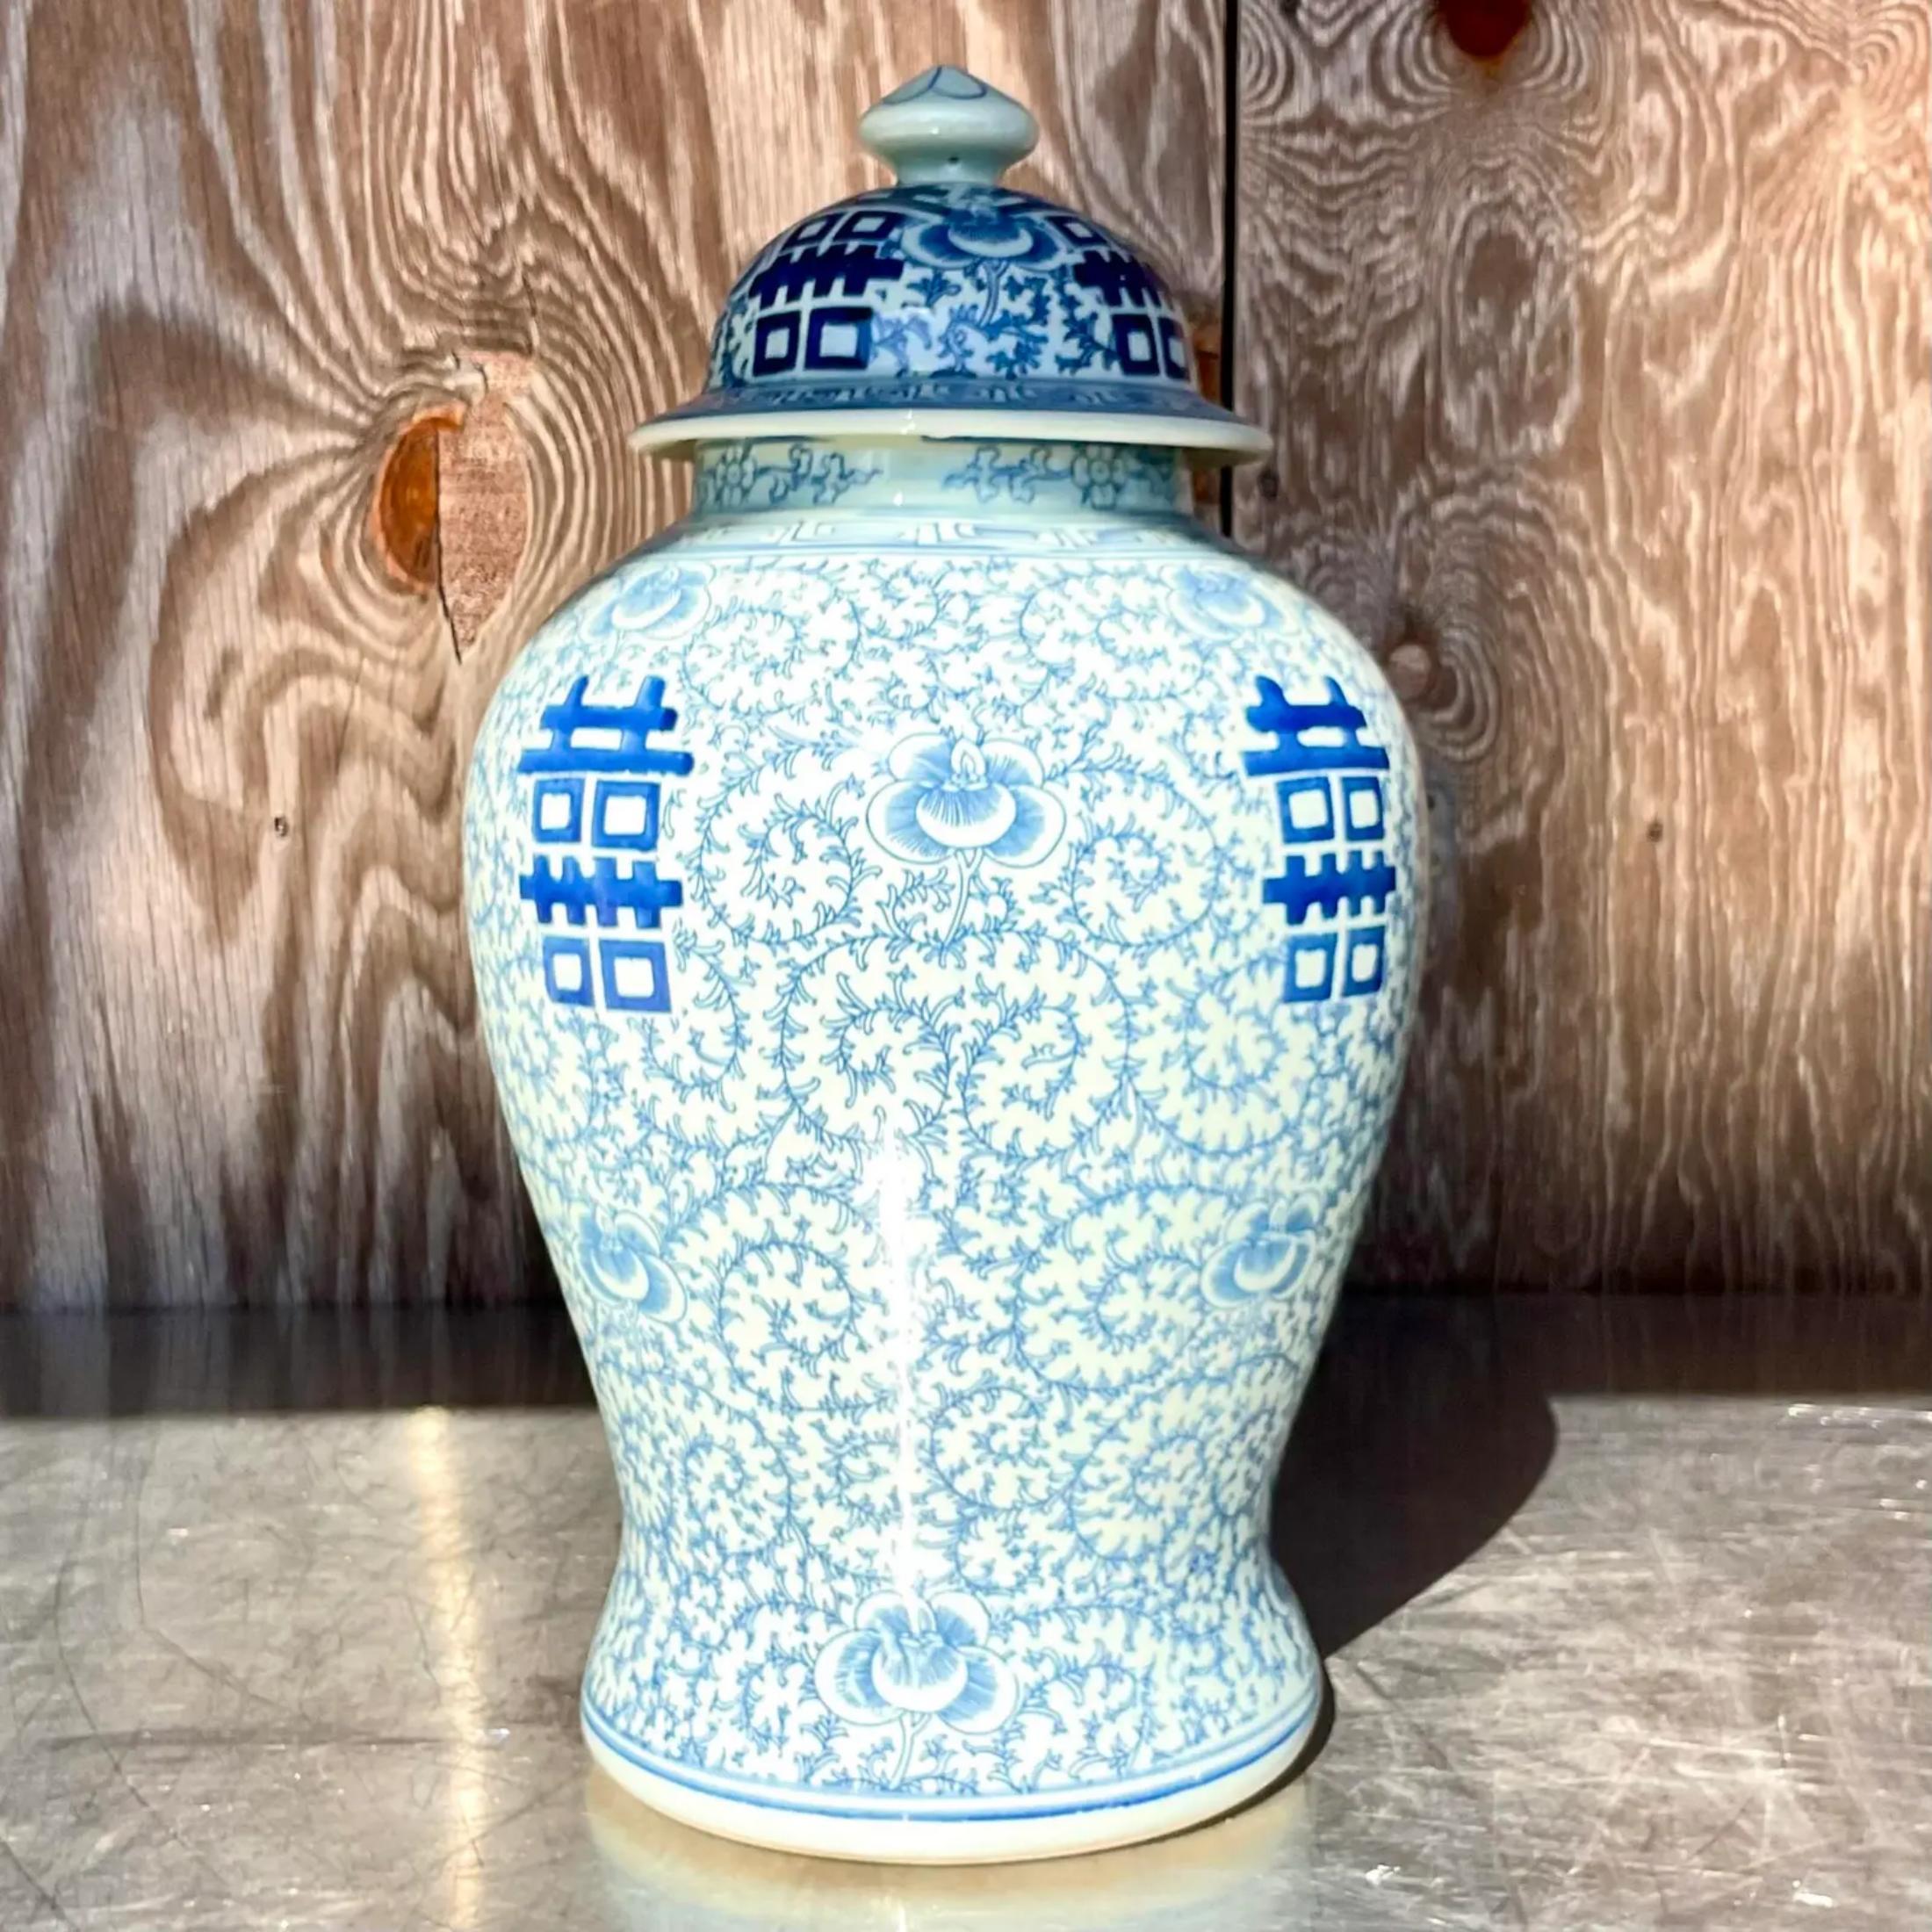 A fabulous vintage Asian lidded urn. Beautiful classic ginger jar shape in the iconic blue and white design. Acquired from a Palm Beach estate.